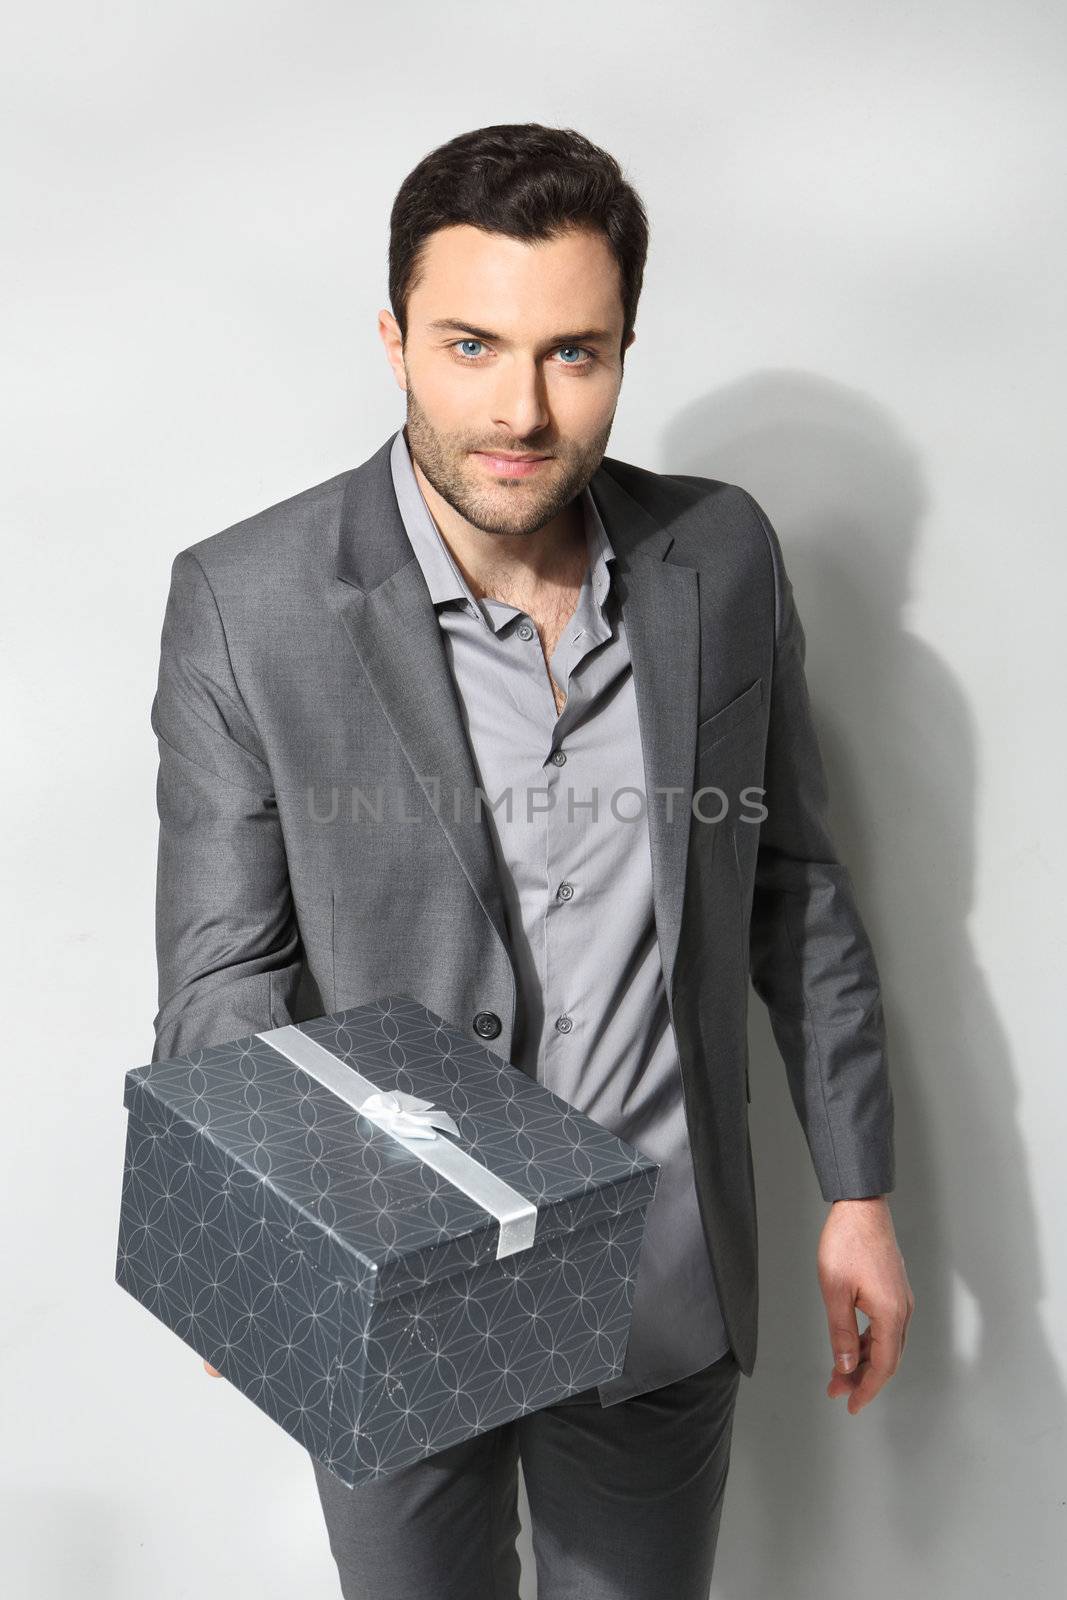 Office clerk with gift box on gray background